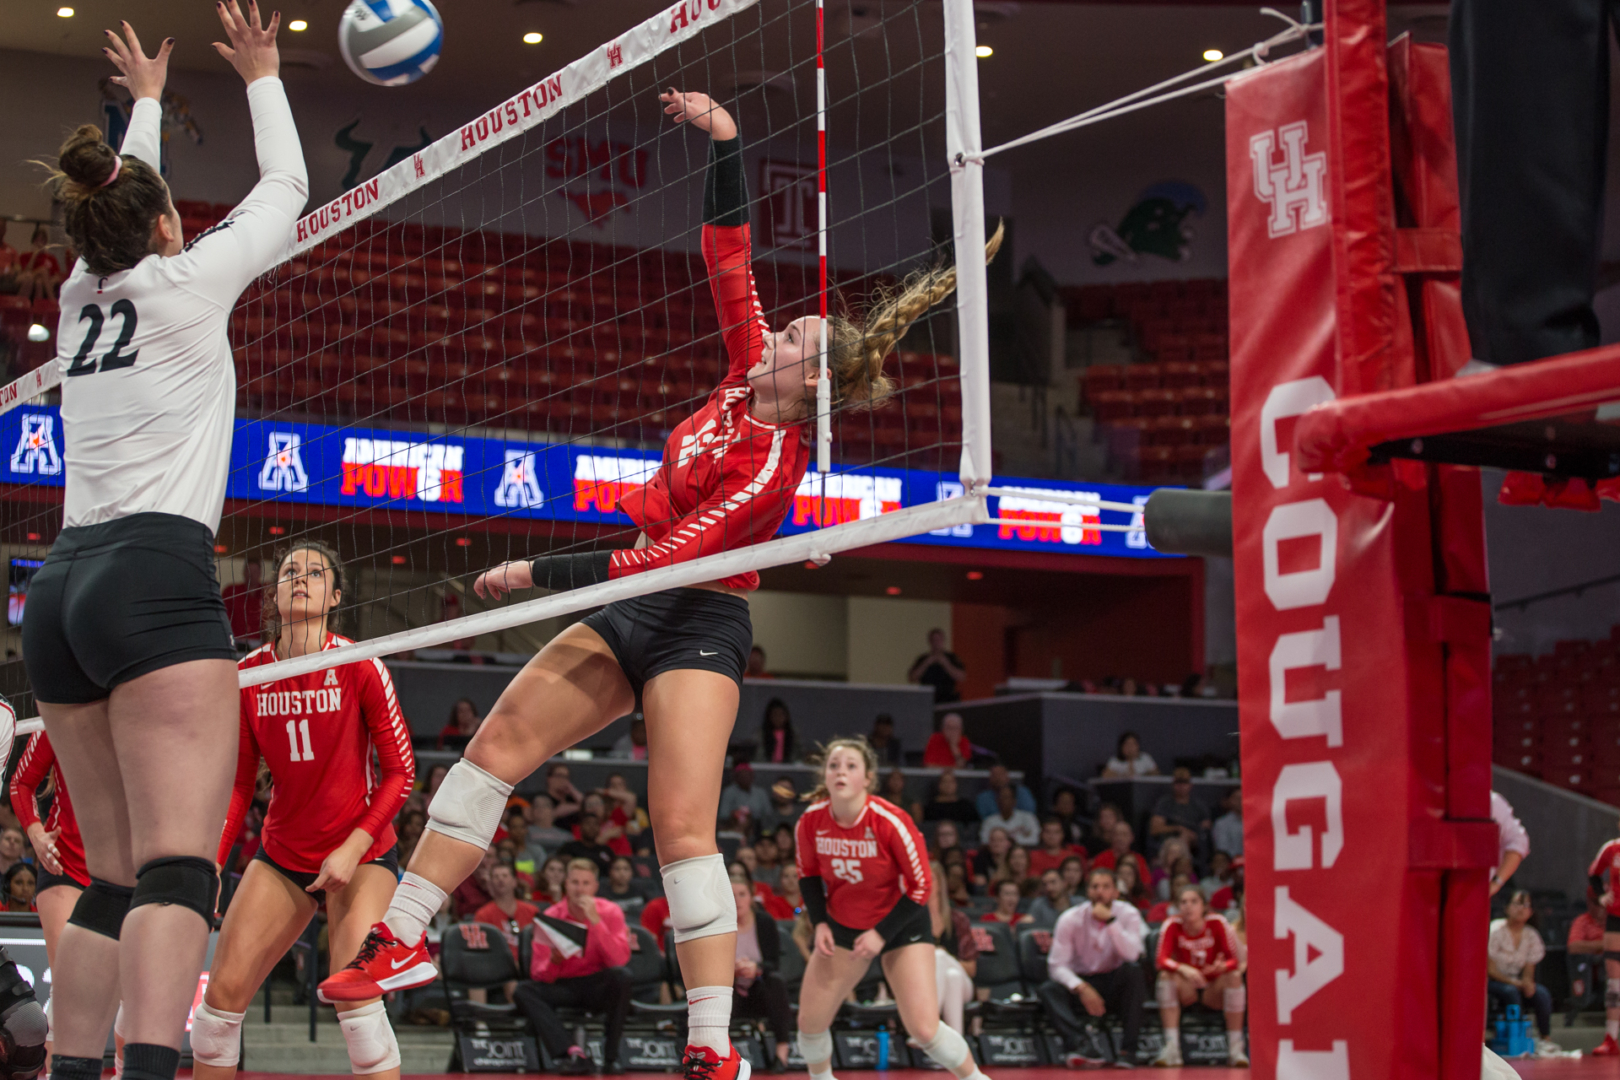 Senior outside hitter Megan Duncan led Houston with 18 kills in the Cougars 3-2 road win over the Bulls on Sunday. | Trevor Nolley/The Cougar